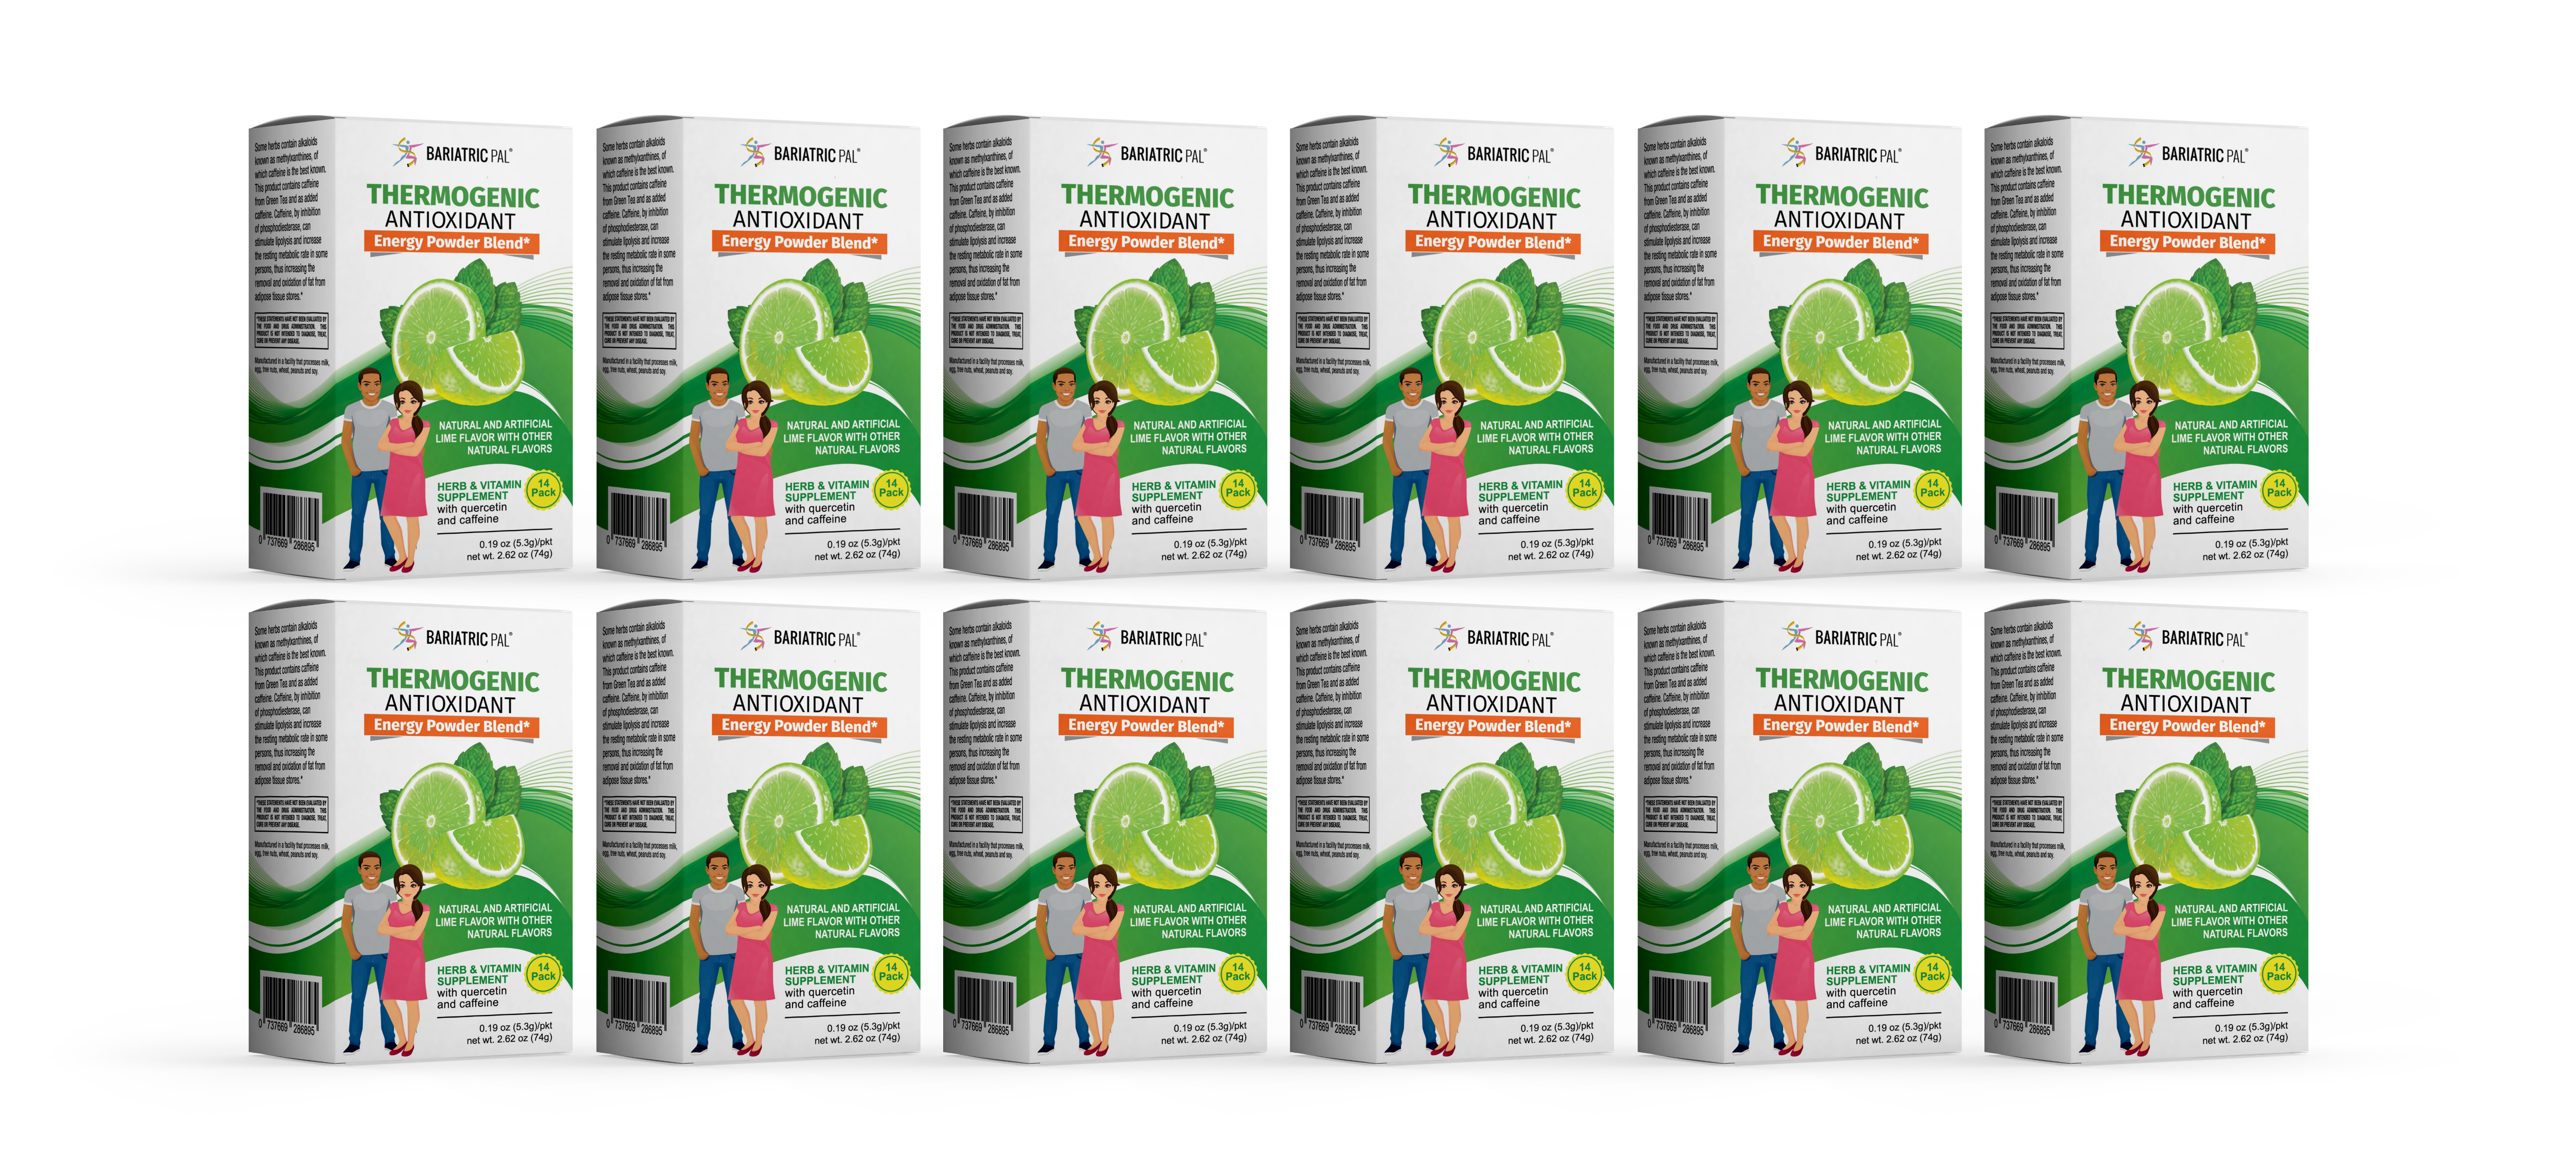 BariatricPal Thermogenic Antioxidant Energy Powder Blend - Available in 3 Flavors! - High-quality Metabolism Booster by BariatricPal at 